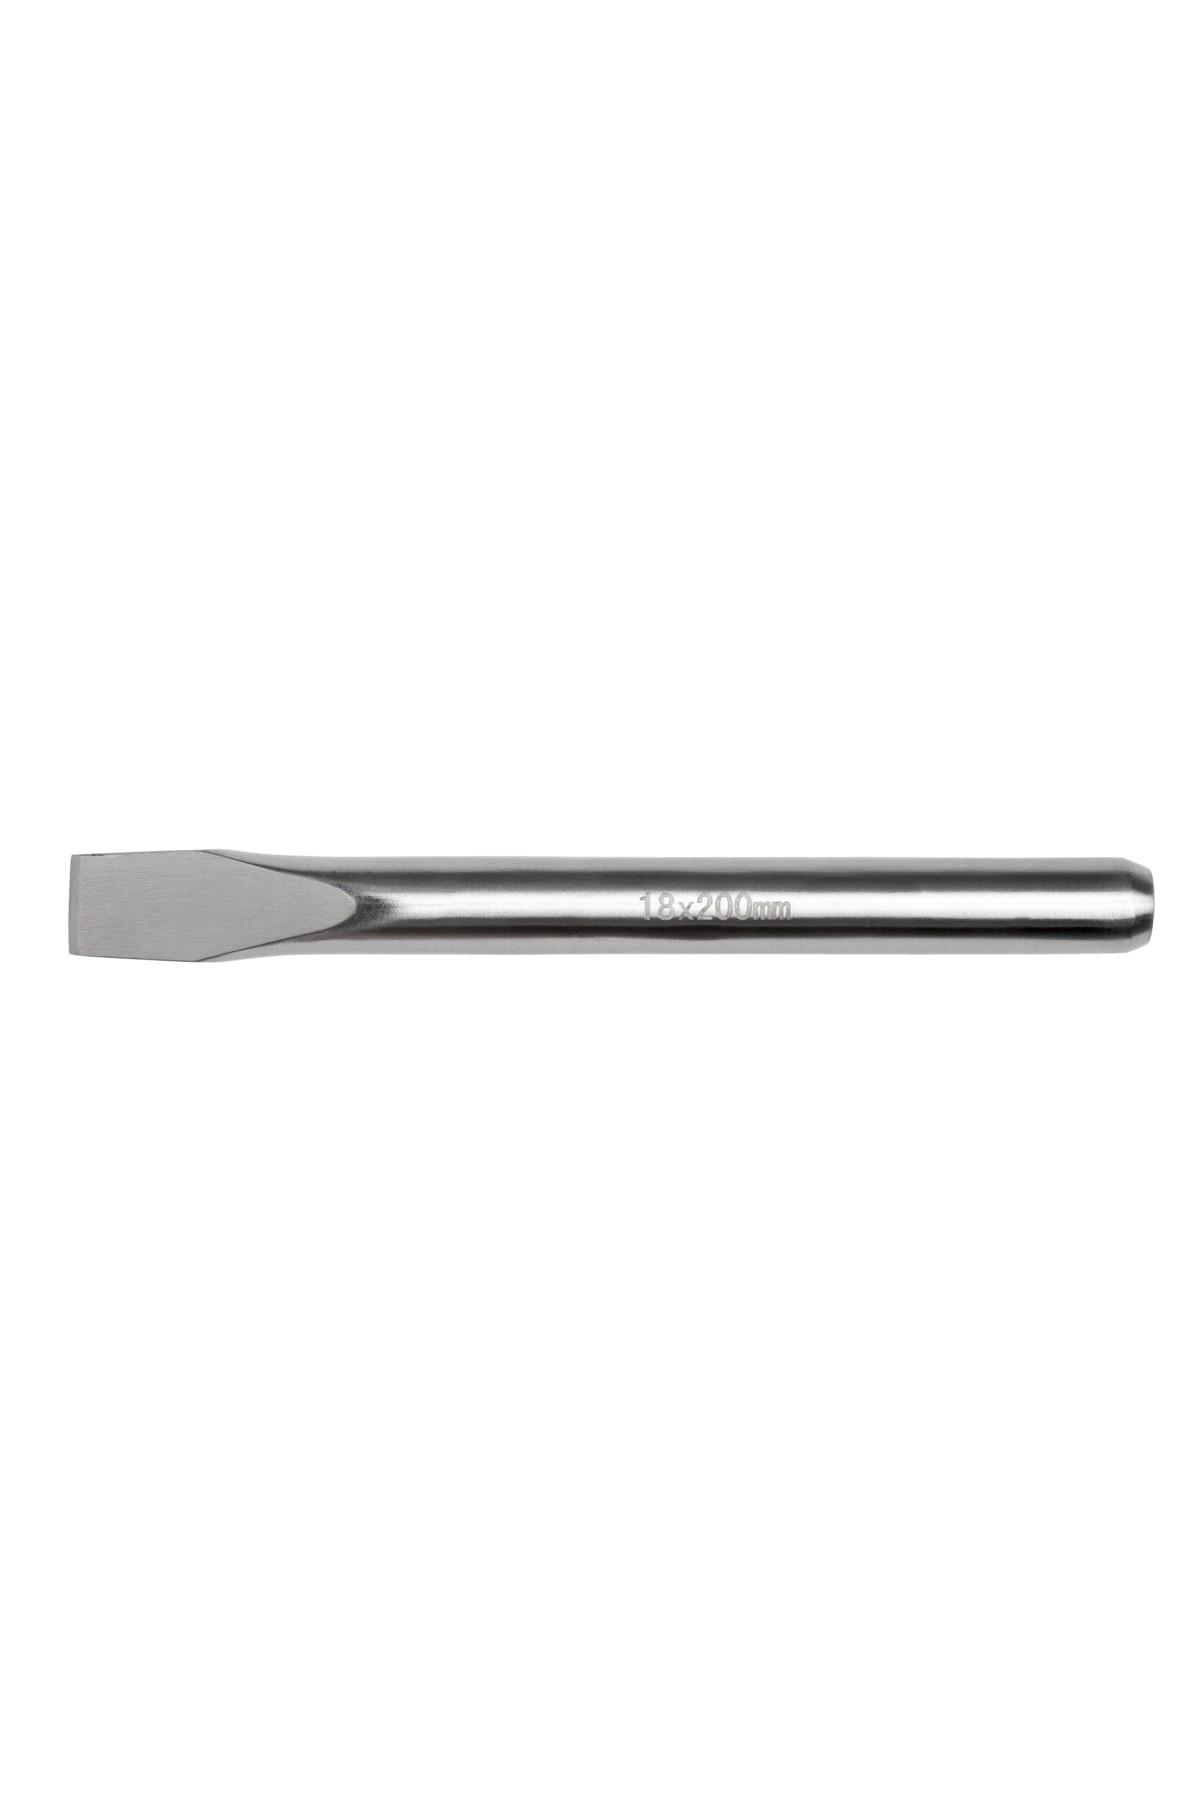 Flat chisel stainless 24-300mm